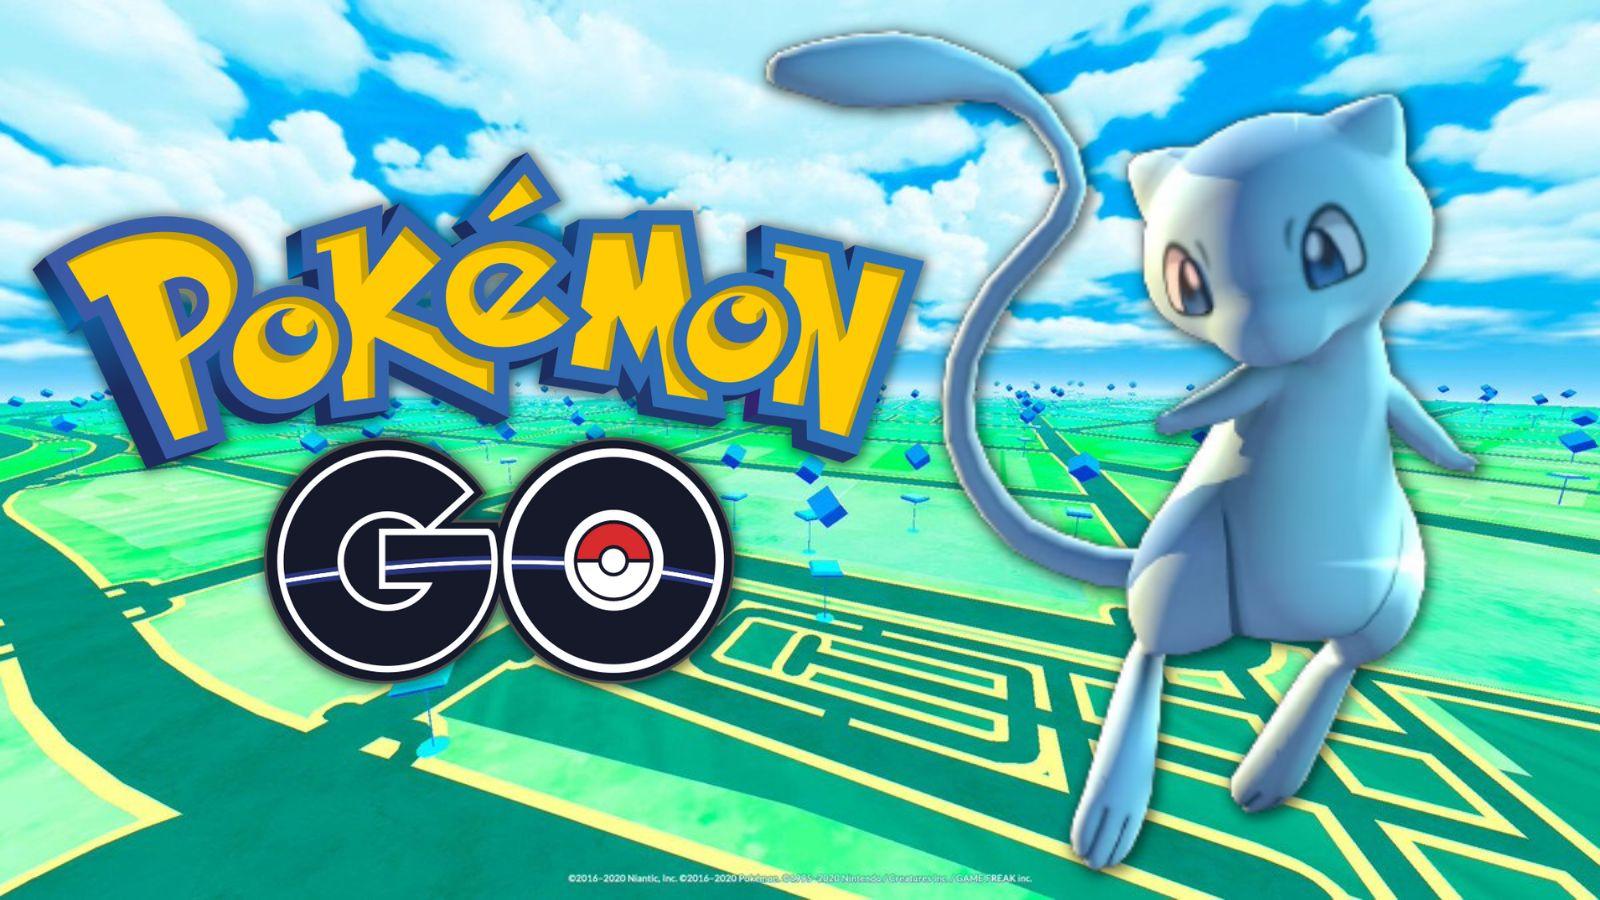 Pokémon Go Shiny Mew, 'All-in-One #151' Masterwork Research guide